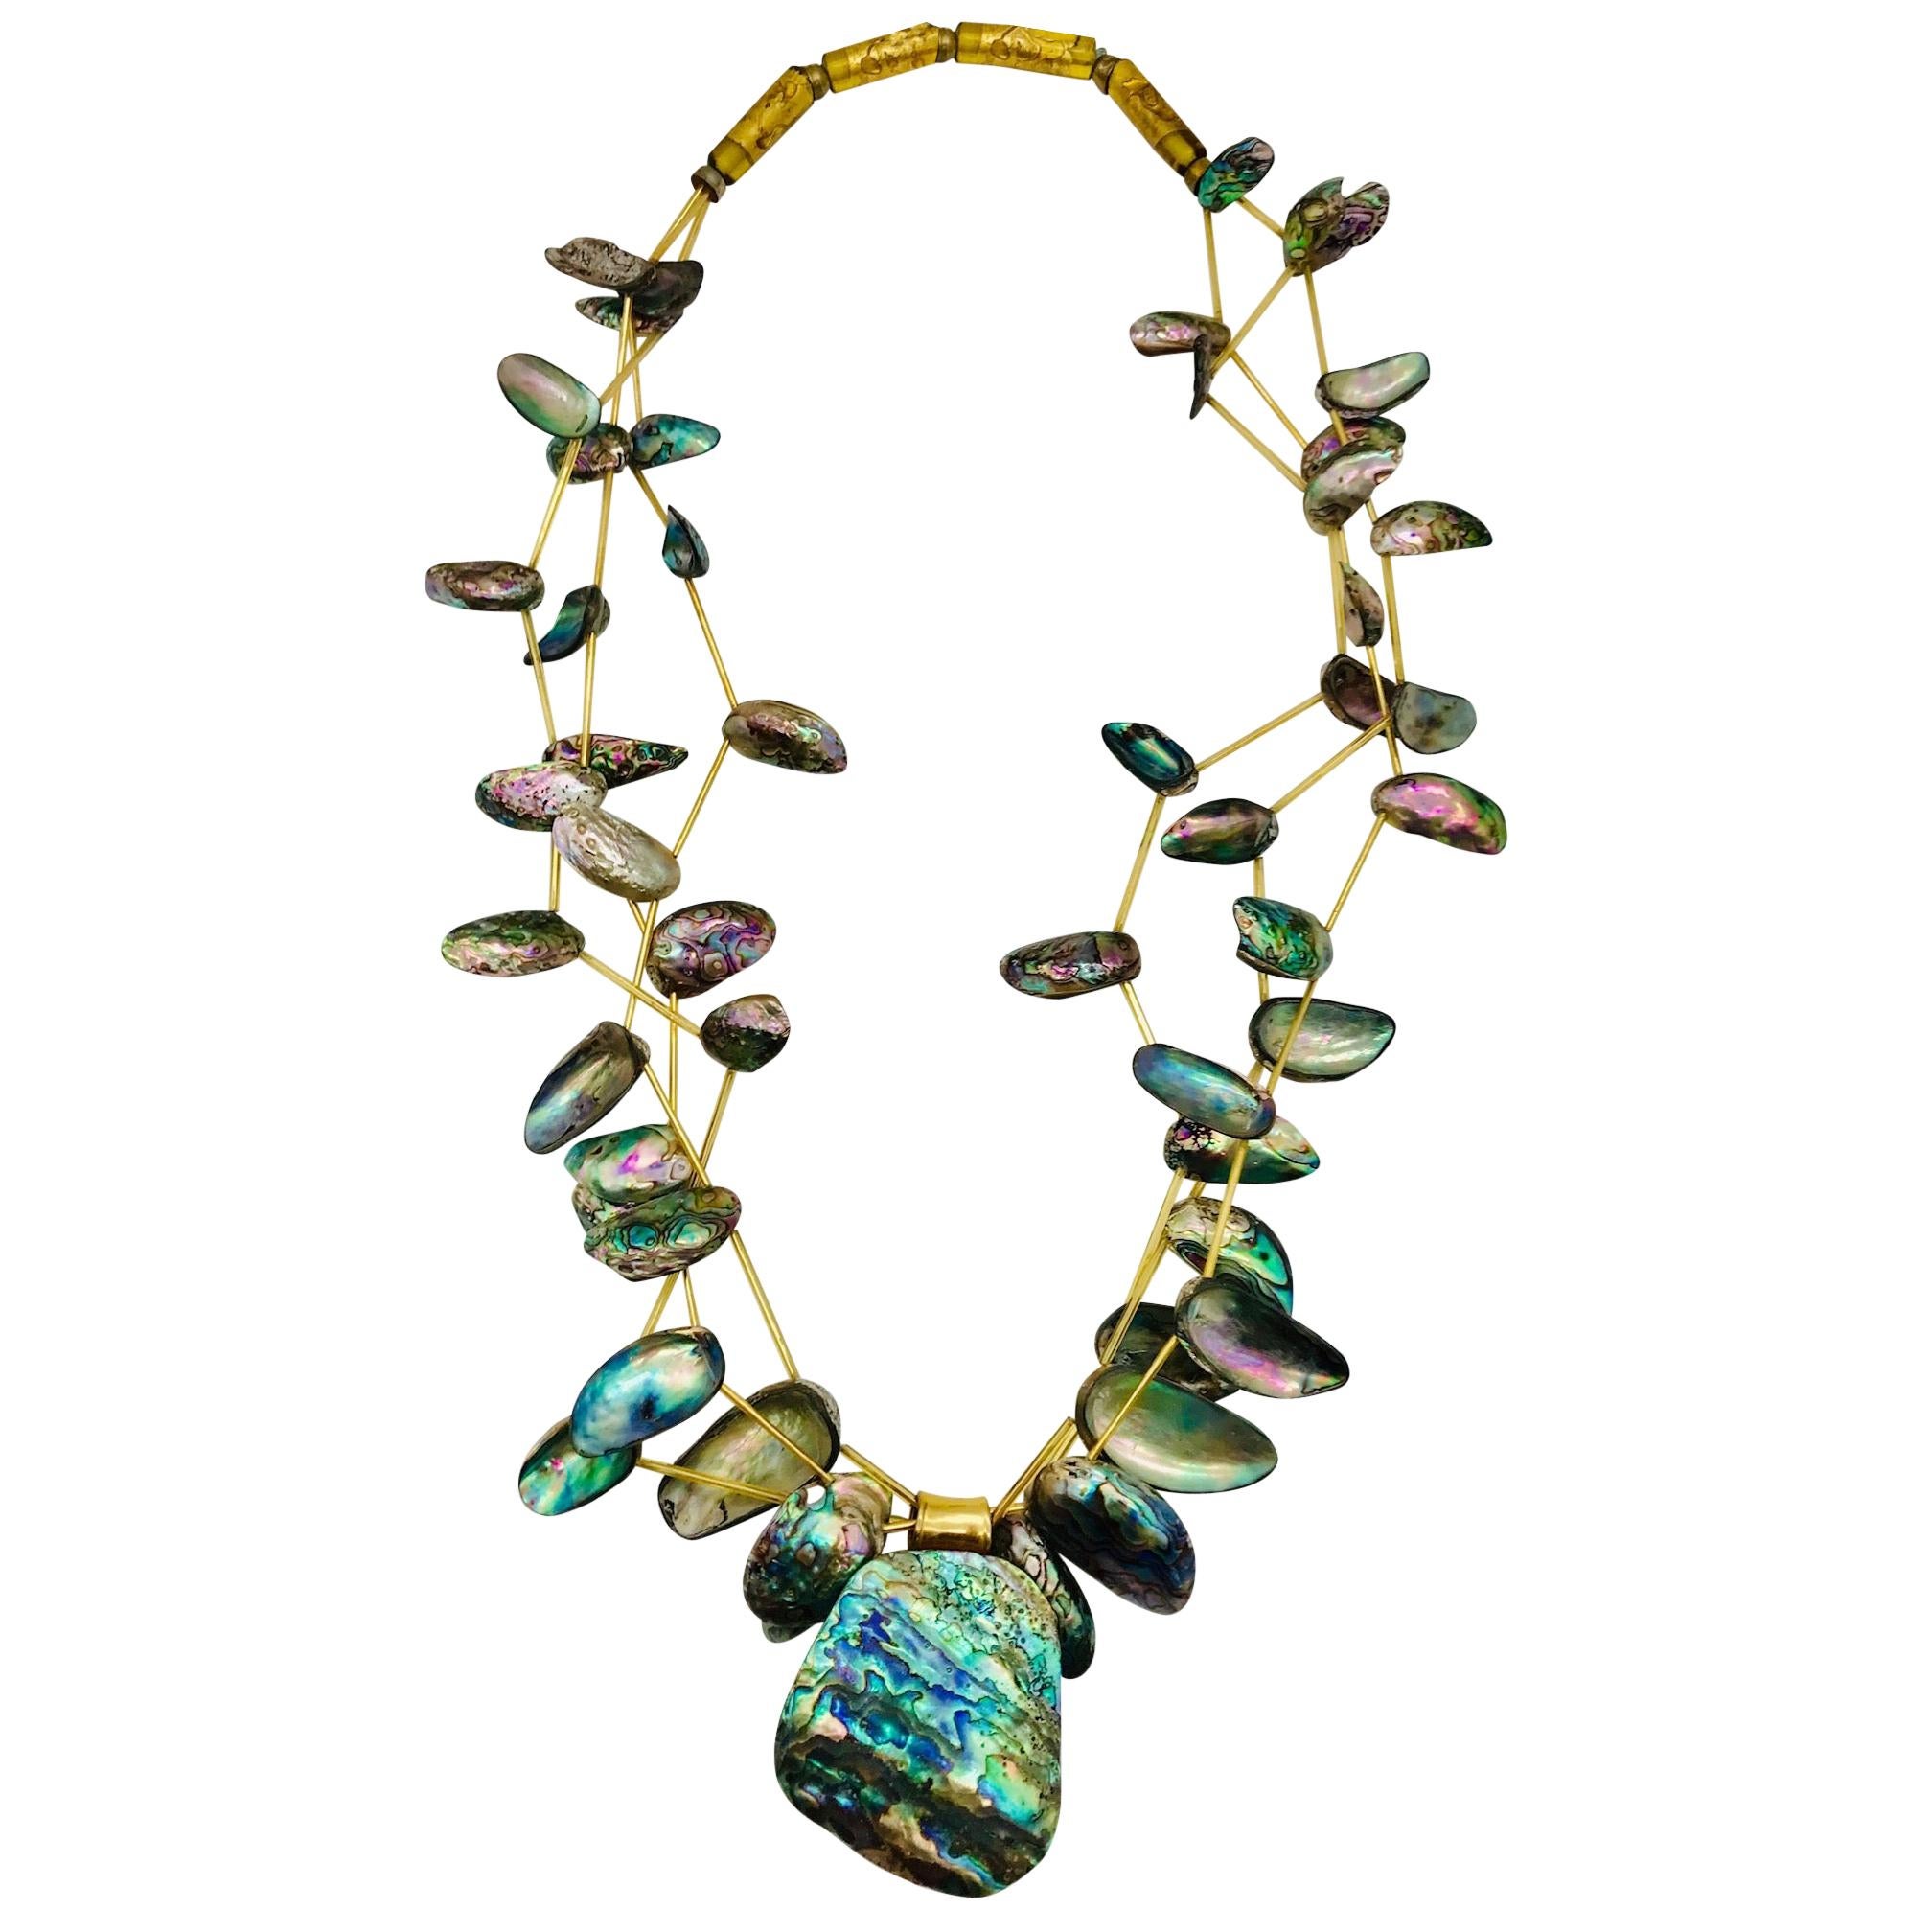 Paua/ Nacre beads, Glass /gold spacers , 3 strand Necklace, by Sylvia Gottwald For Sale